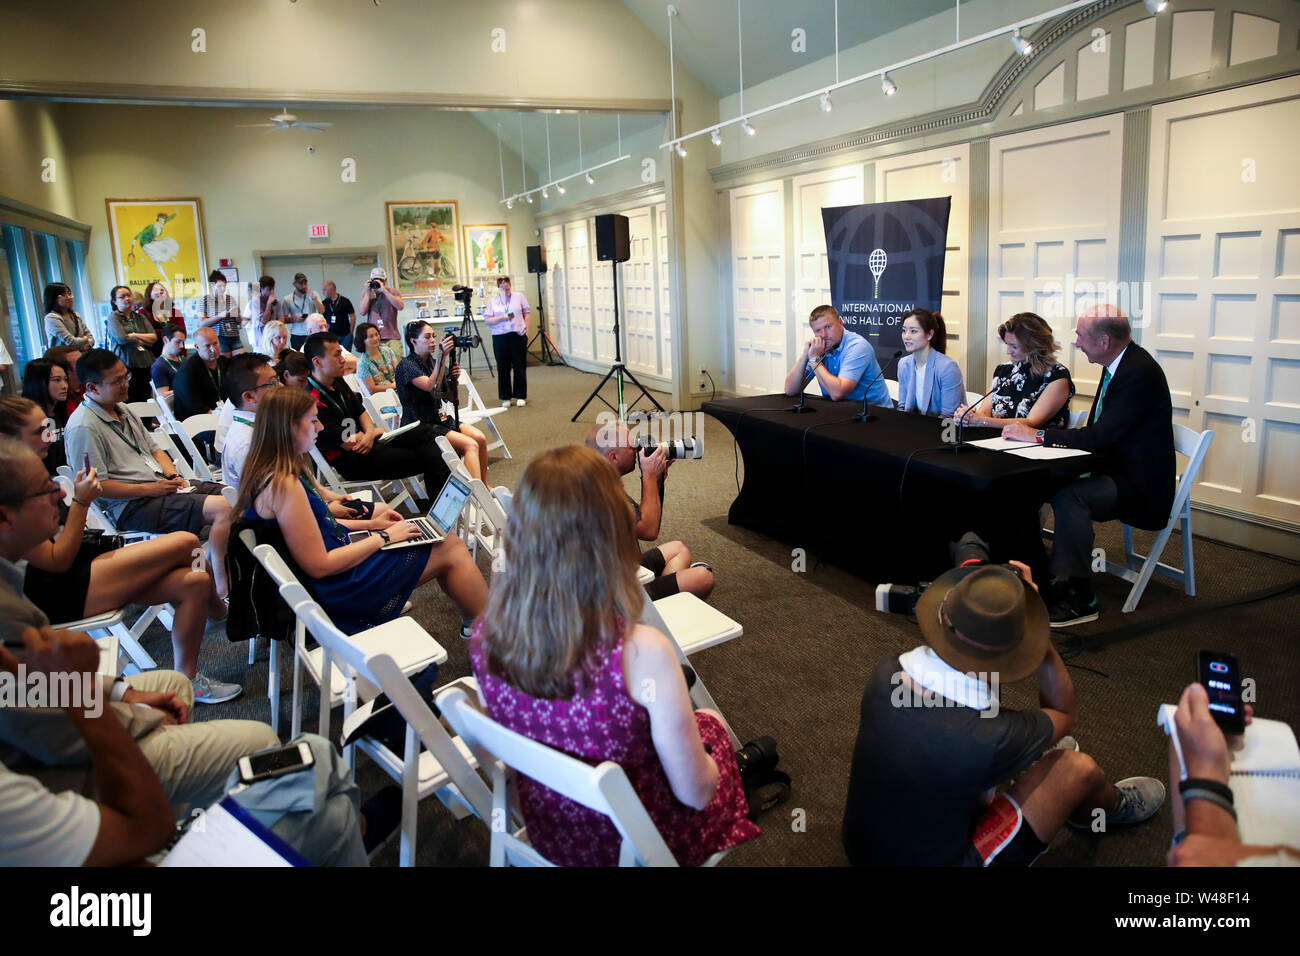 Rhode Island, USA. 20th July, 2019. Mary Pierce (2nd R) of France, Li Na (3rd R) of China and Yevgeny Kafelnikov (4th R) of Russia attend a press conference before the induction ceremony of the International Tennis Hall of Fame in Newport of Rhode Island, the United States, July 20, 2019. Credit: Wang Ying/Xinhua/Alamy Live News Stock Photo